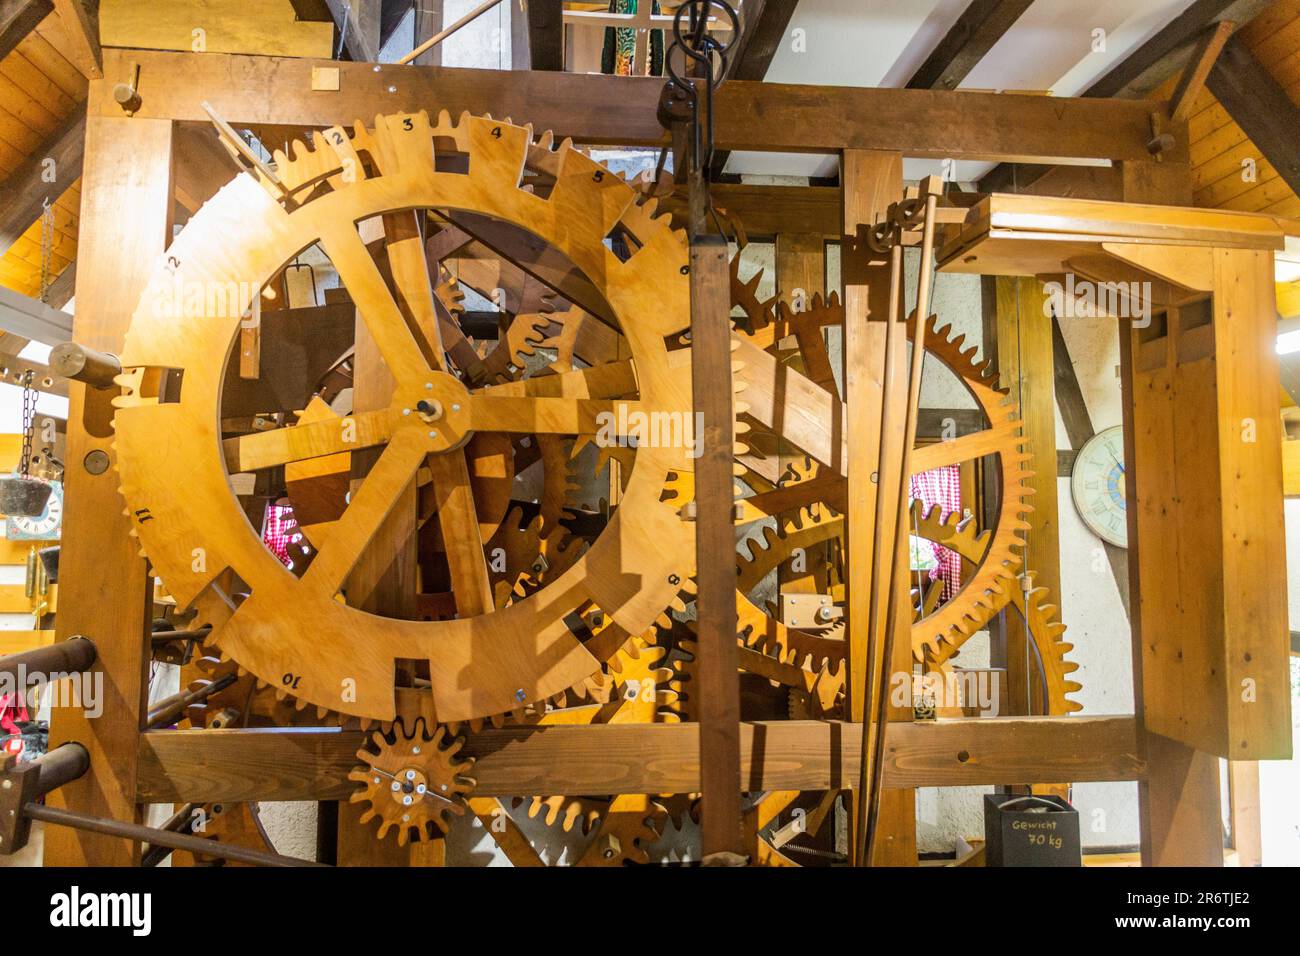 TRIBERG, GERMANY - SEPTEMBER 2, 2019: Machinery of the world's oldest-largest cuckoo clock in Triberg village in Baden-Wuerttemberg, Germany Stock Photo